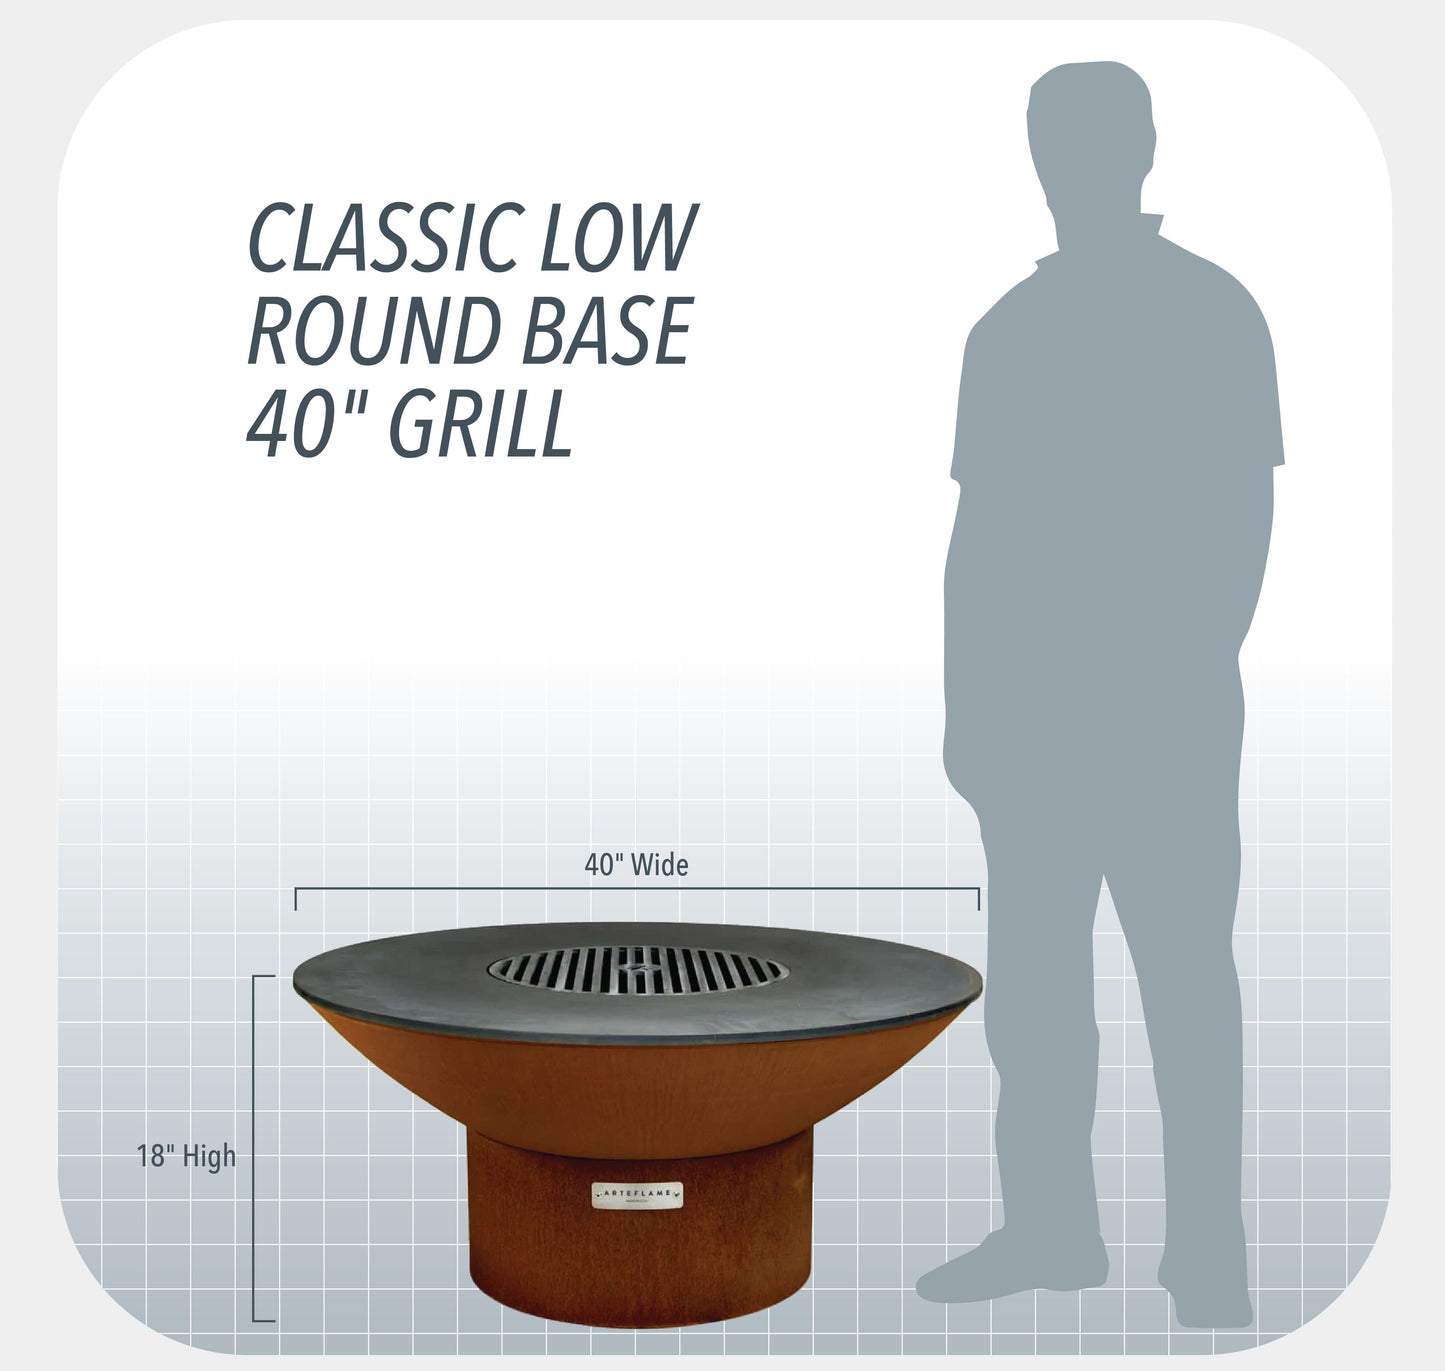 Arteflame Classic 40" Grill - Low Round Base by Arteflame Outdoor Grills